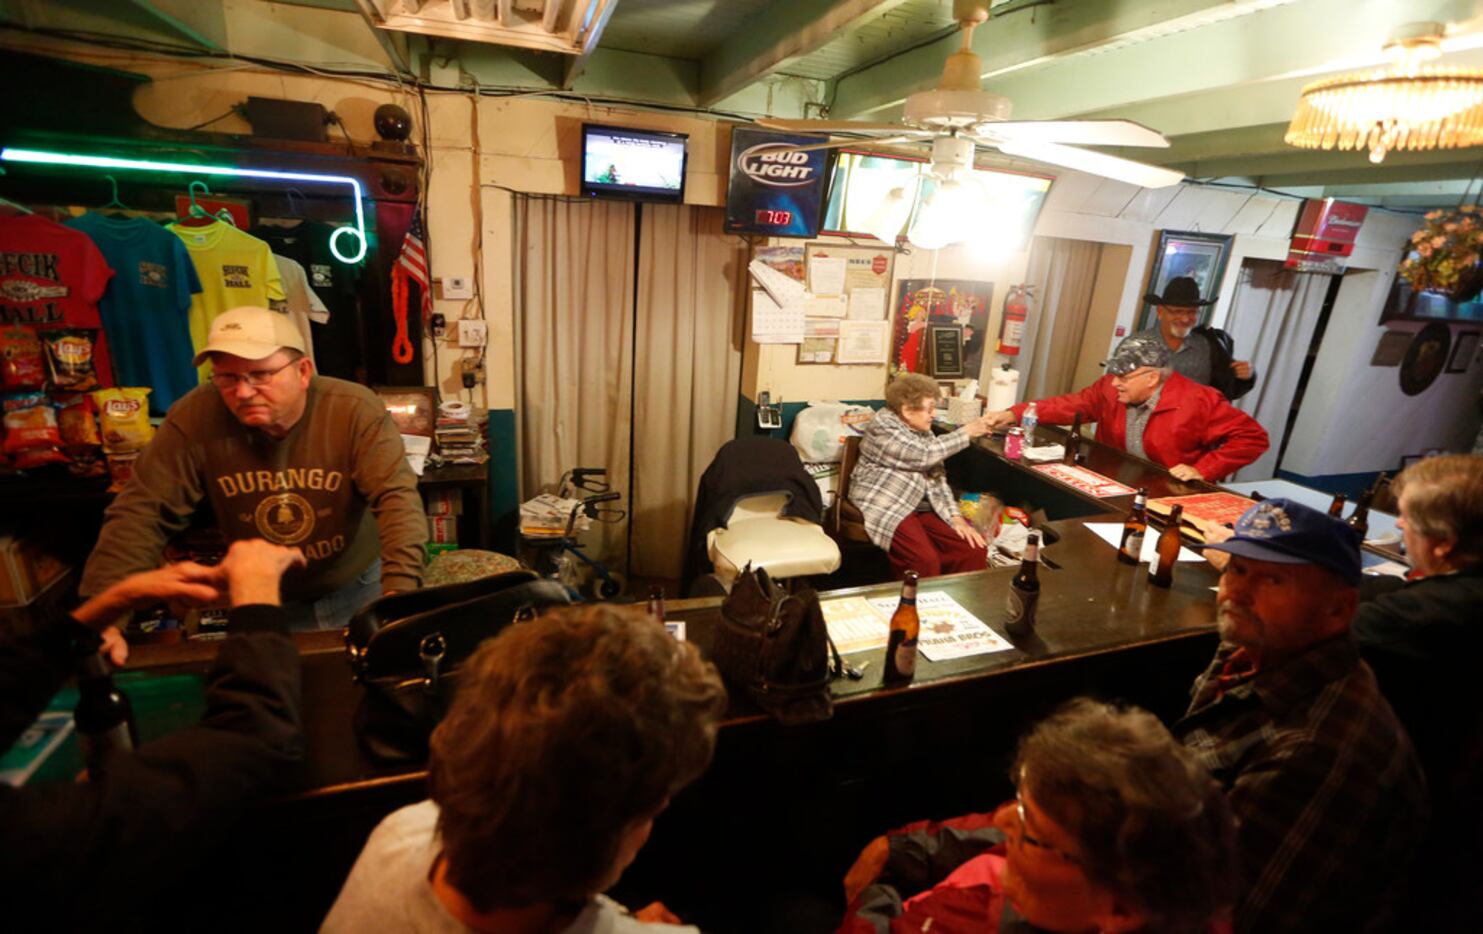 Kenny Sulak (left) and his mother, Alice Sulak, talk to customers at the downstairs bar.